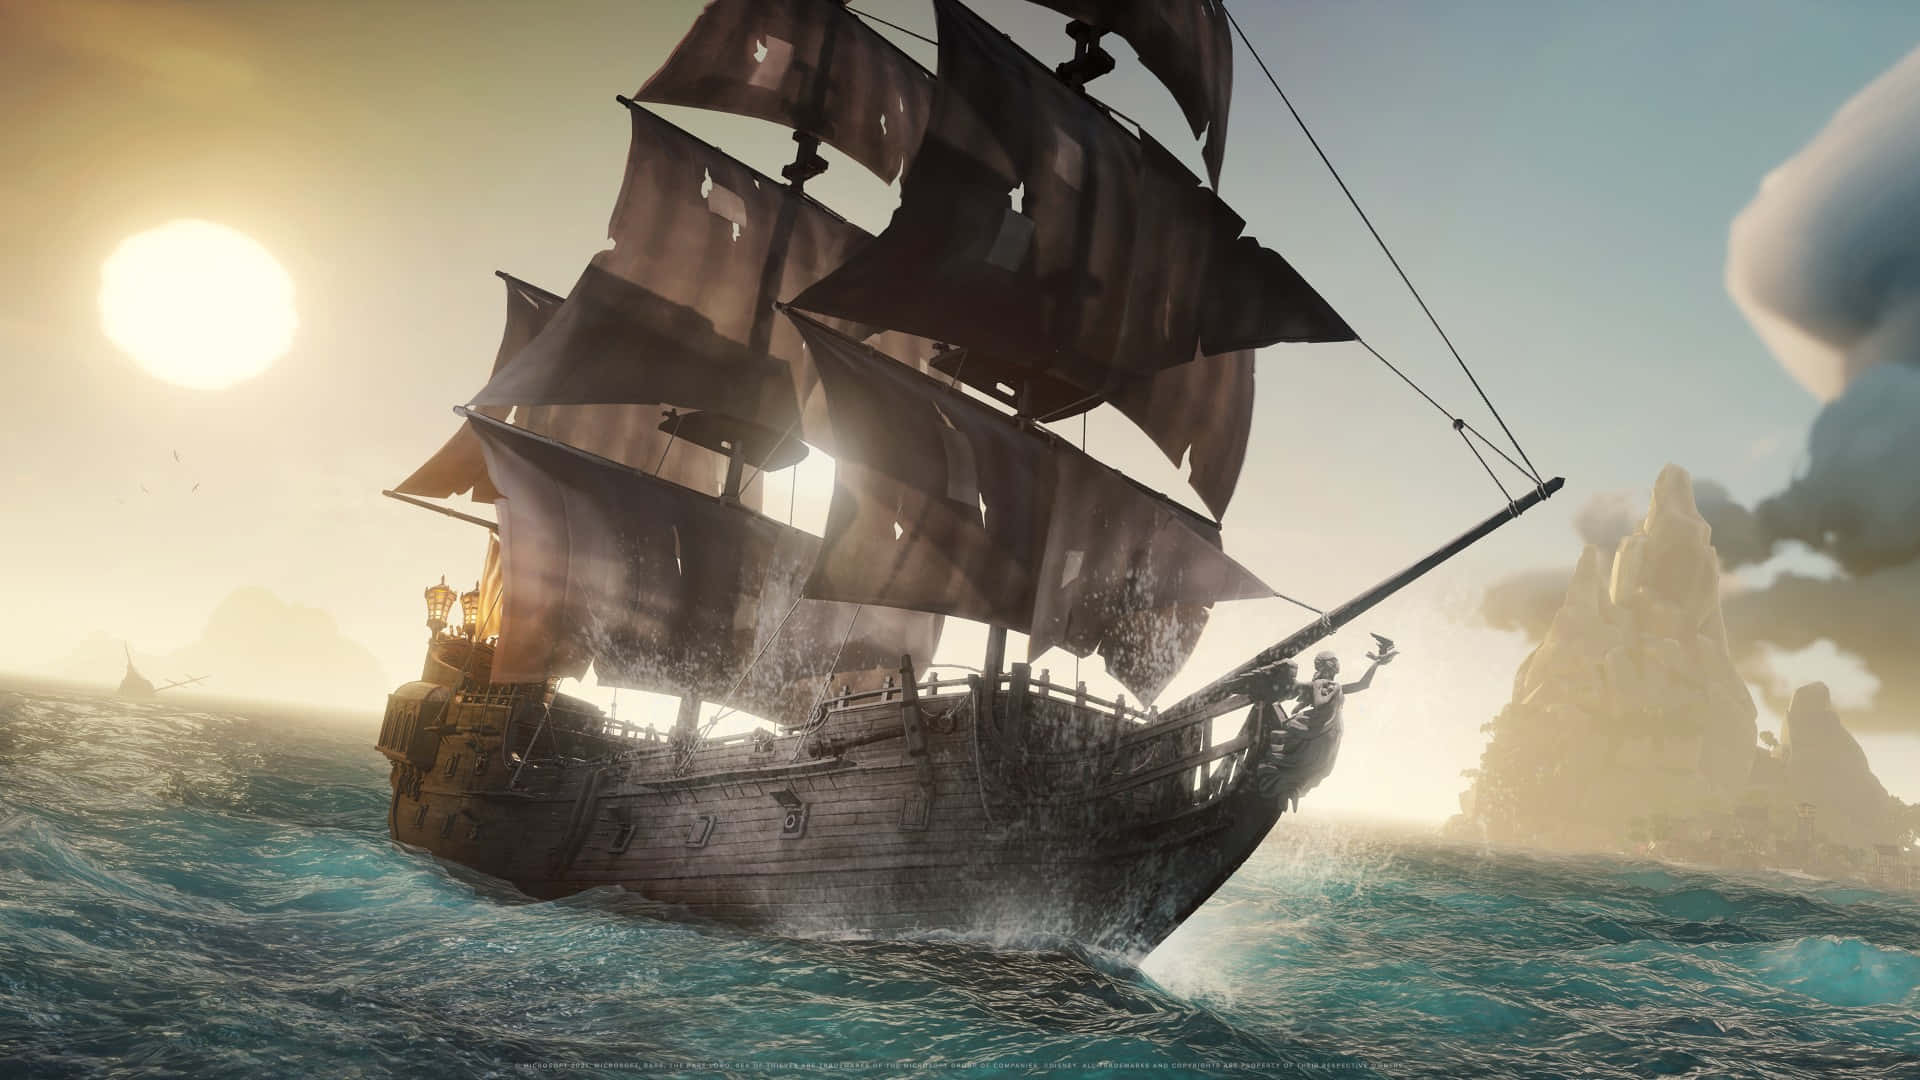 A thrilling adventure awaits in Sea of Thieves